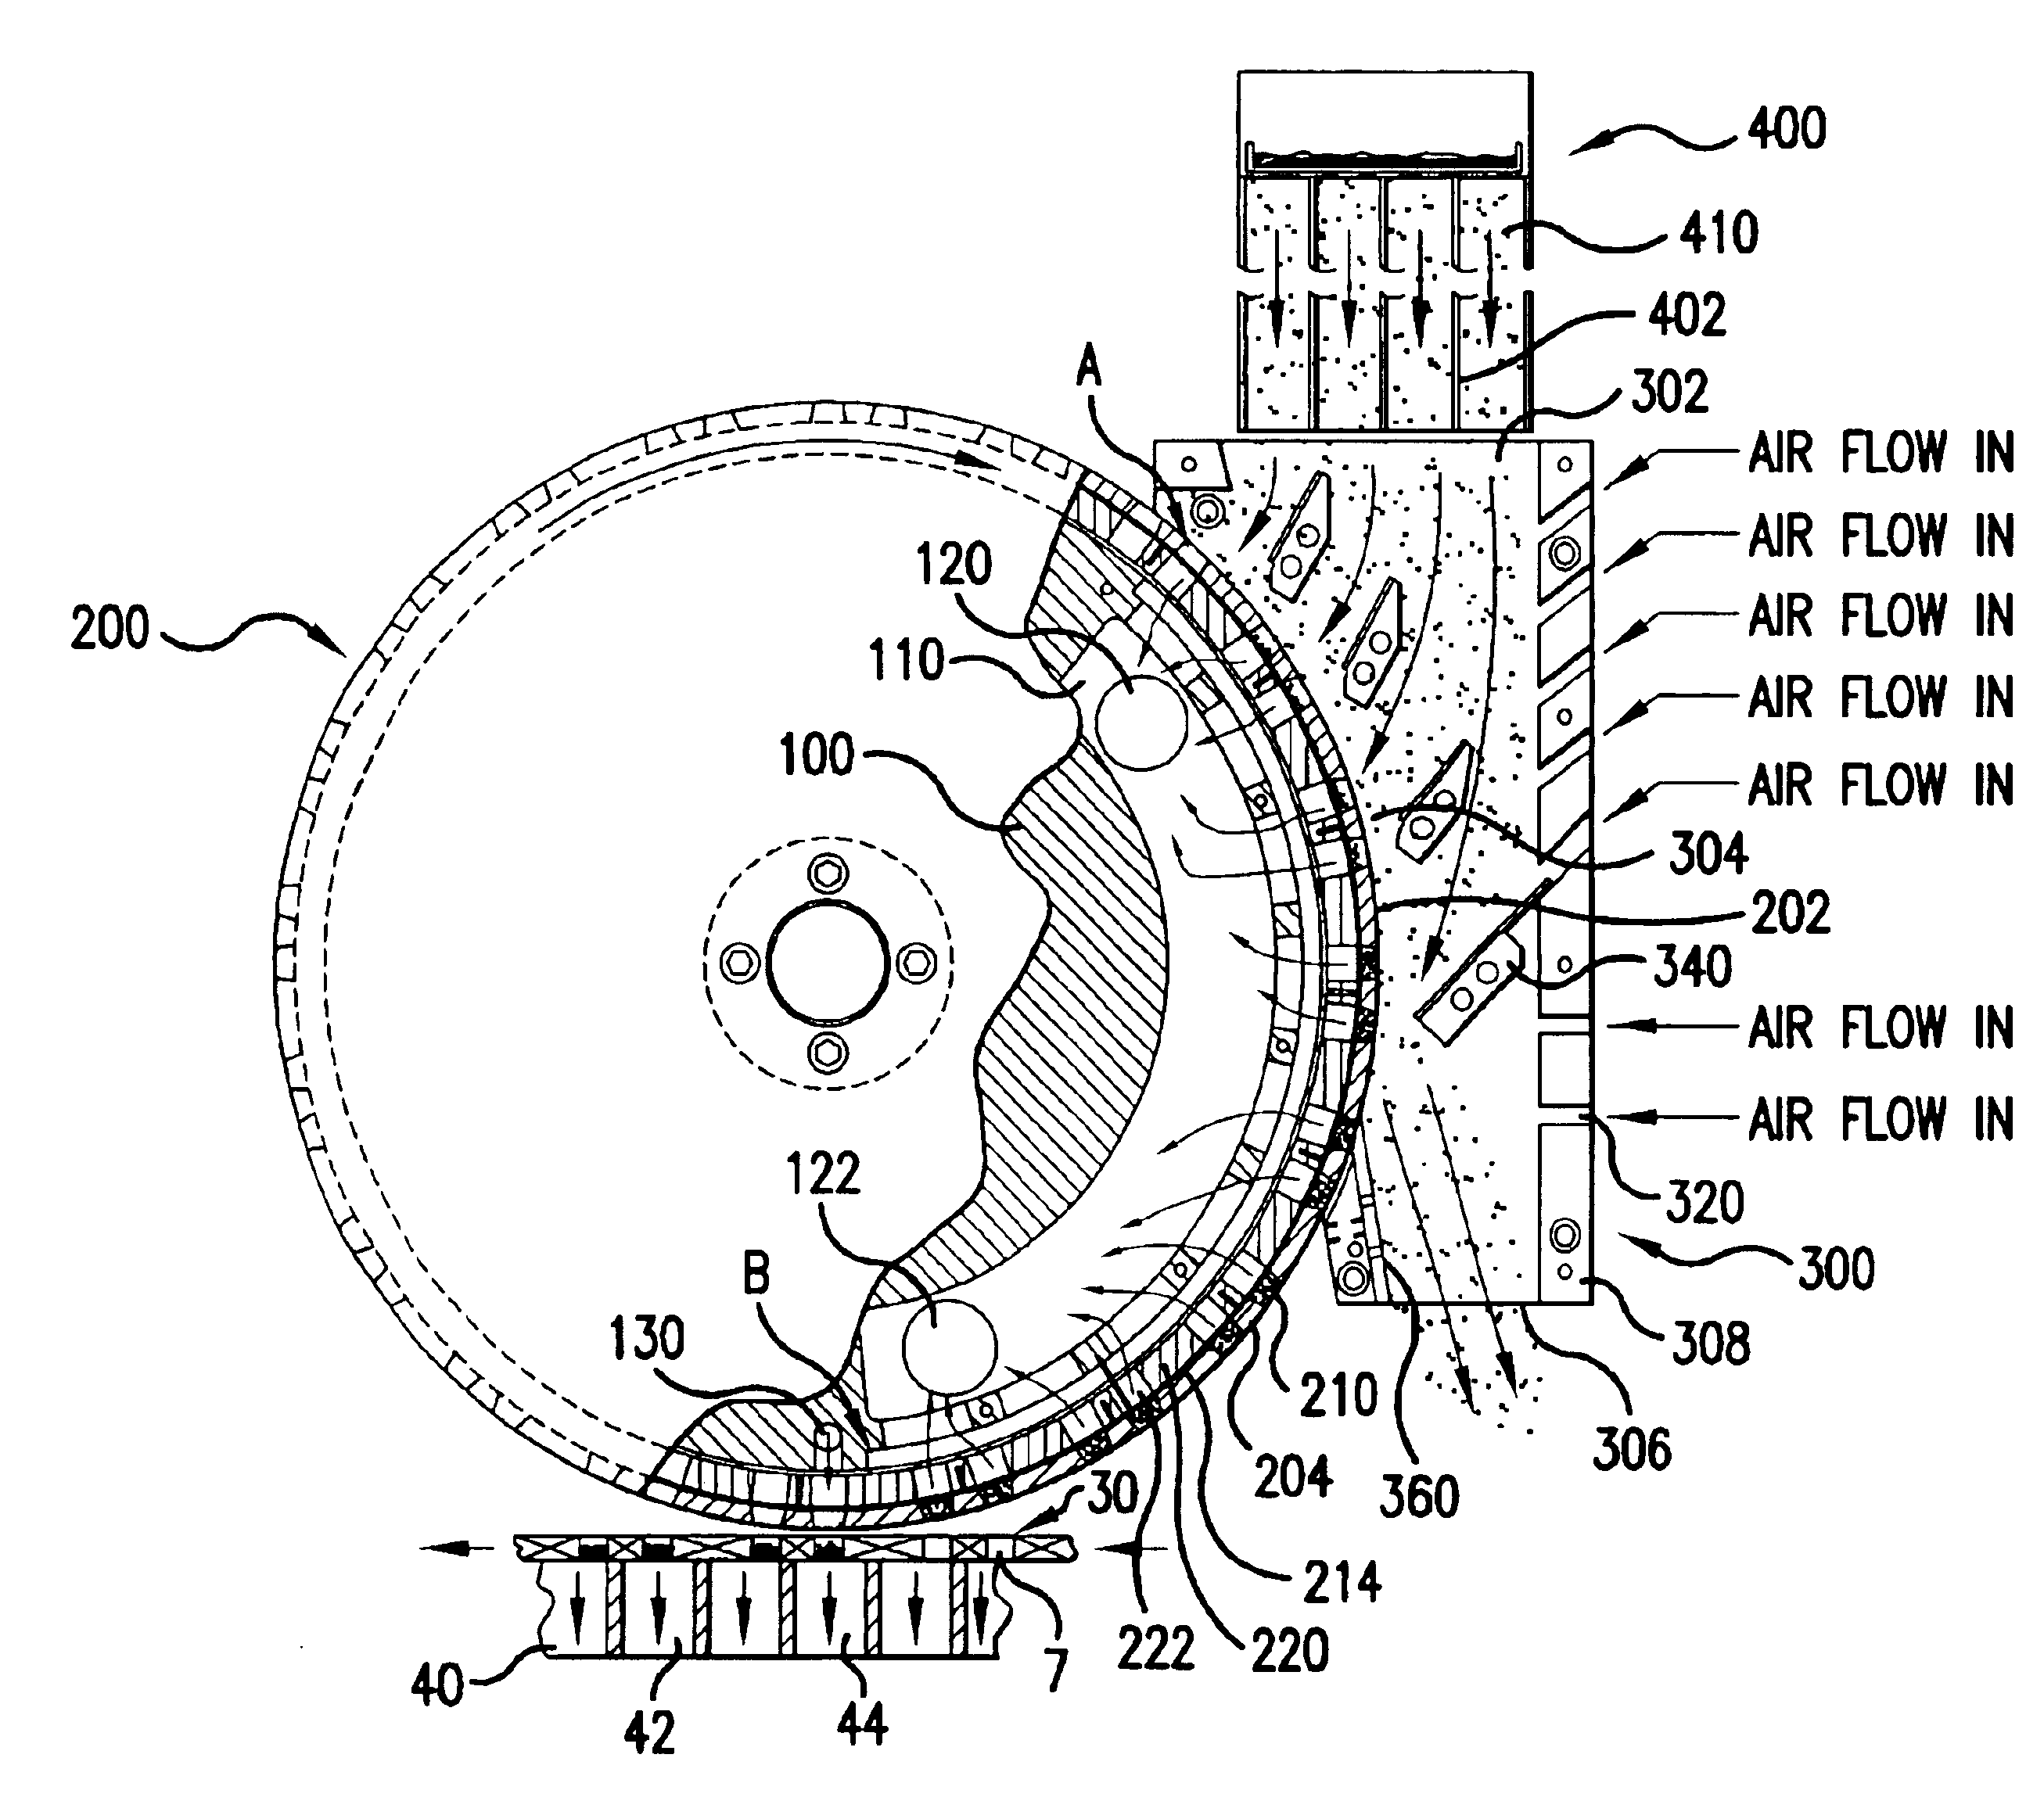 Apparatus and method for filling cavities with metered amounts of granular particles